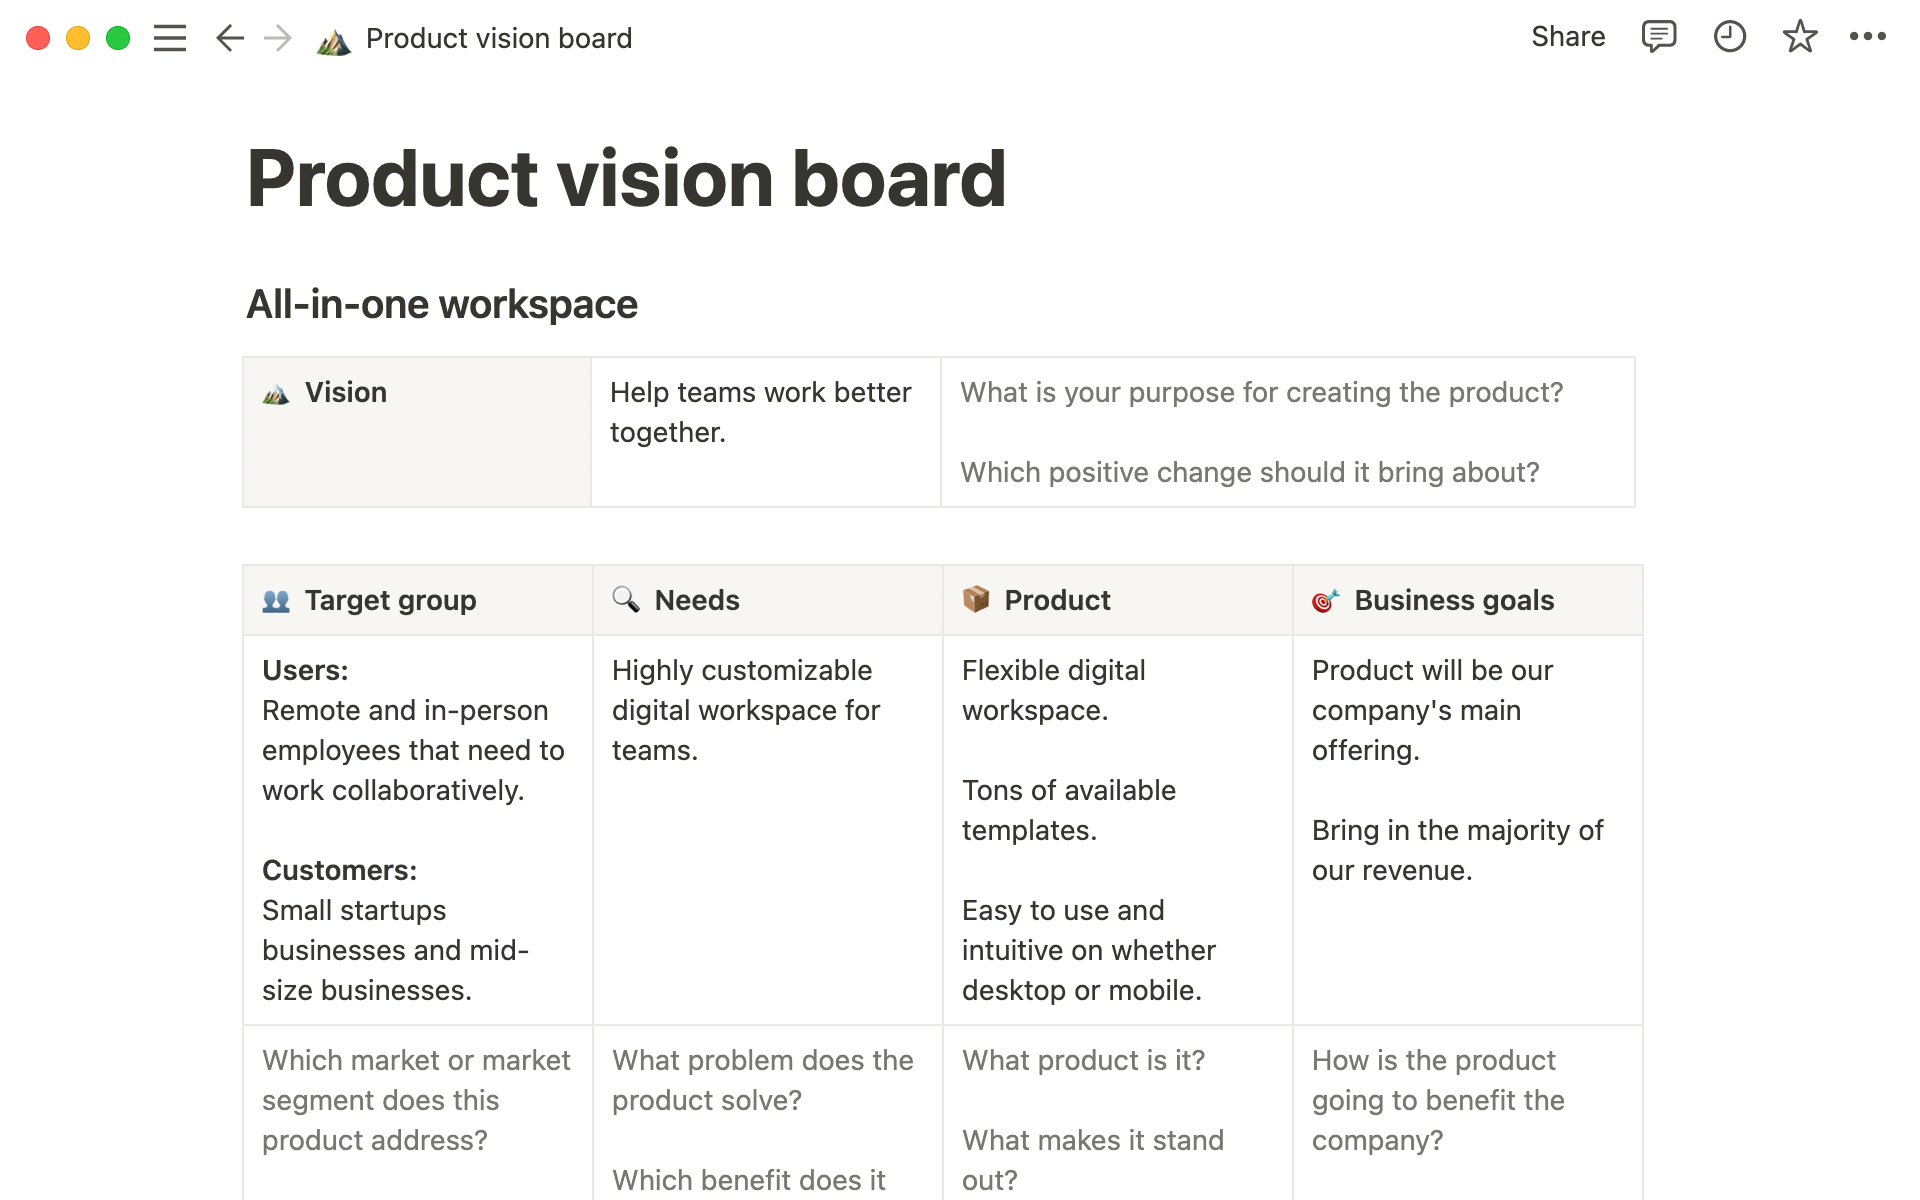 Keeping the board concise allows startups to focus on their overarching goals.